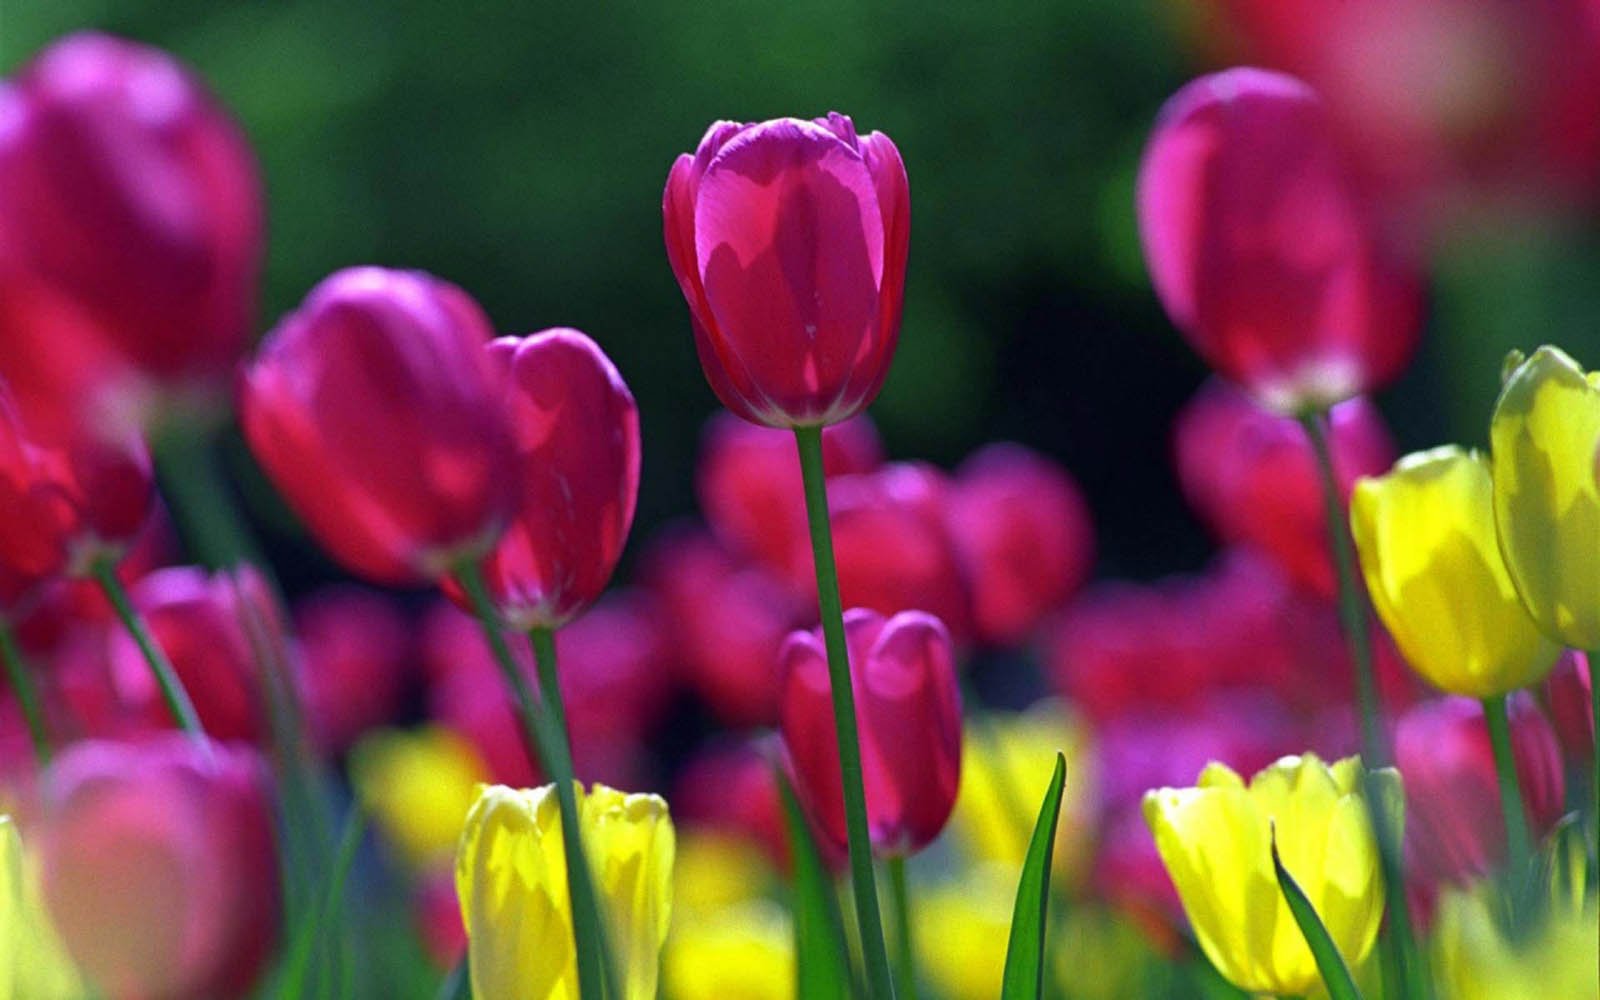  Spring Flowers Wallpapers Images Photos Pictures and Backgrounds